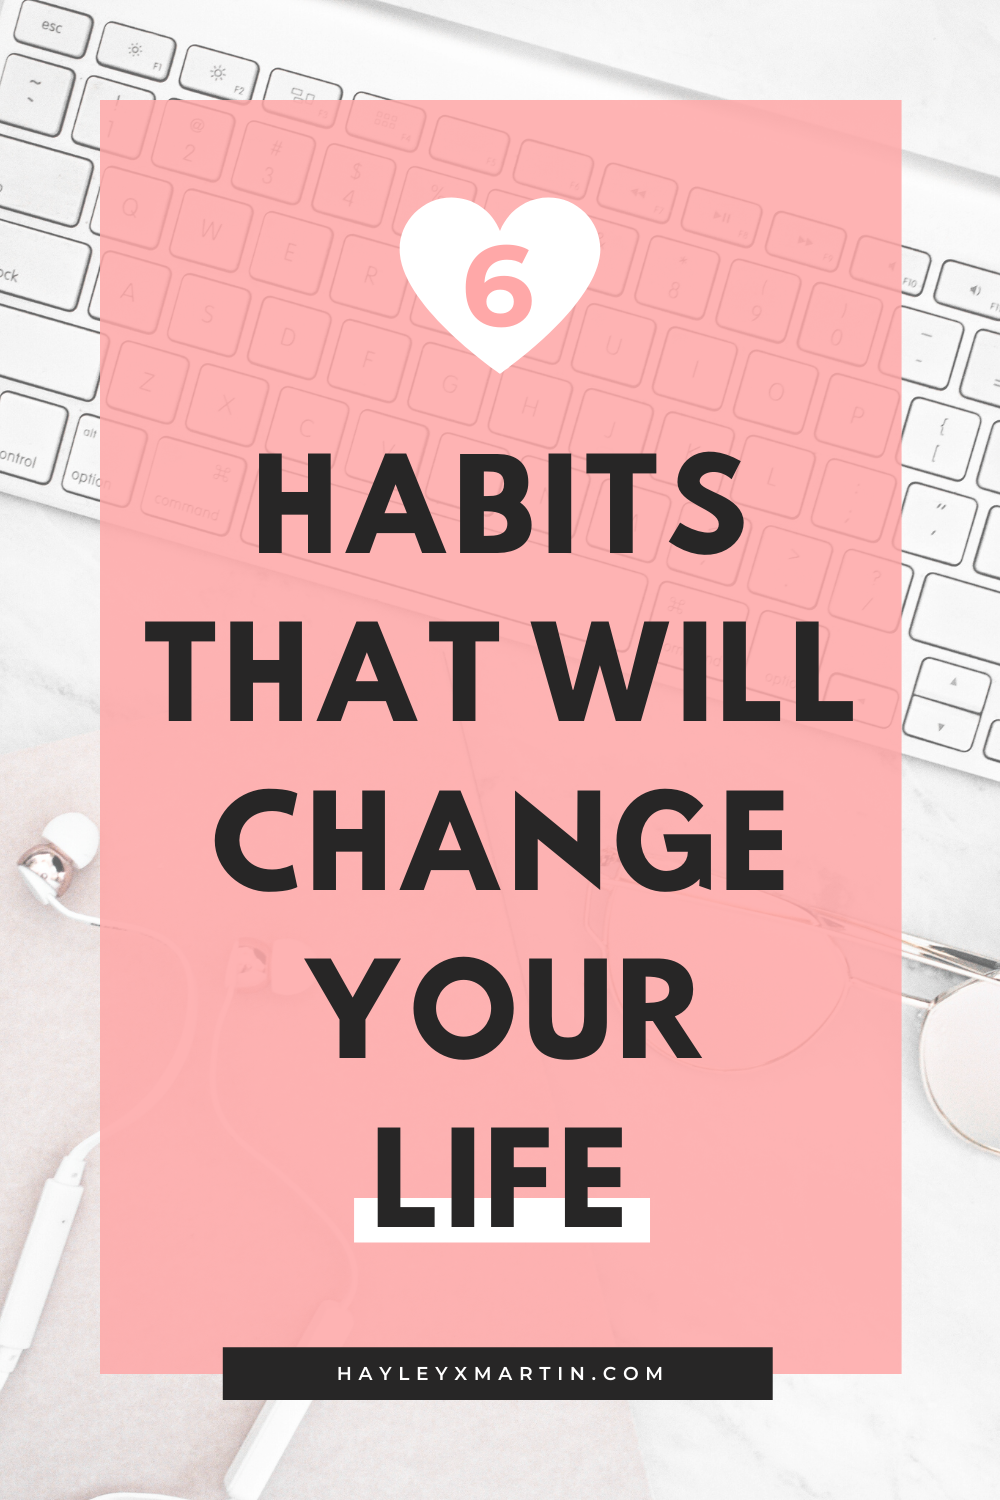 6 habits that will change your life | hayleyxmartin